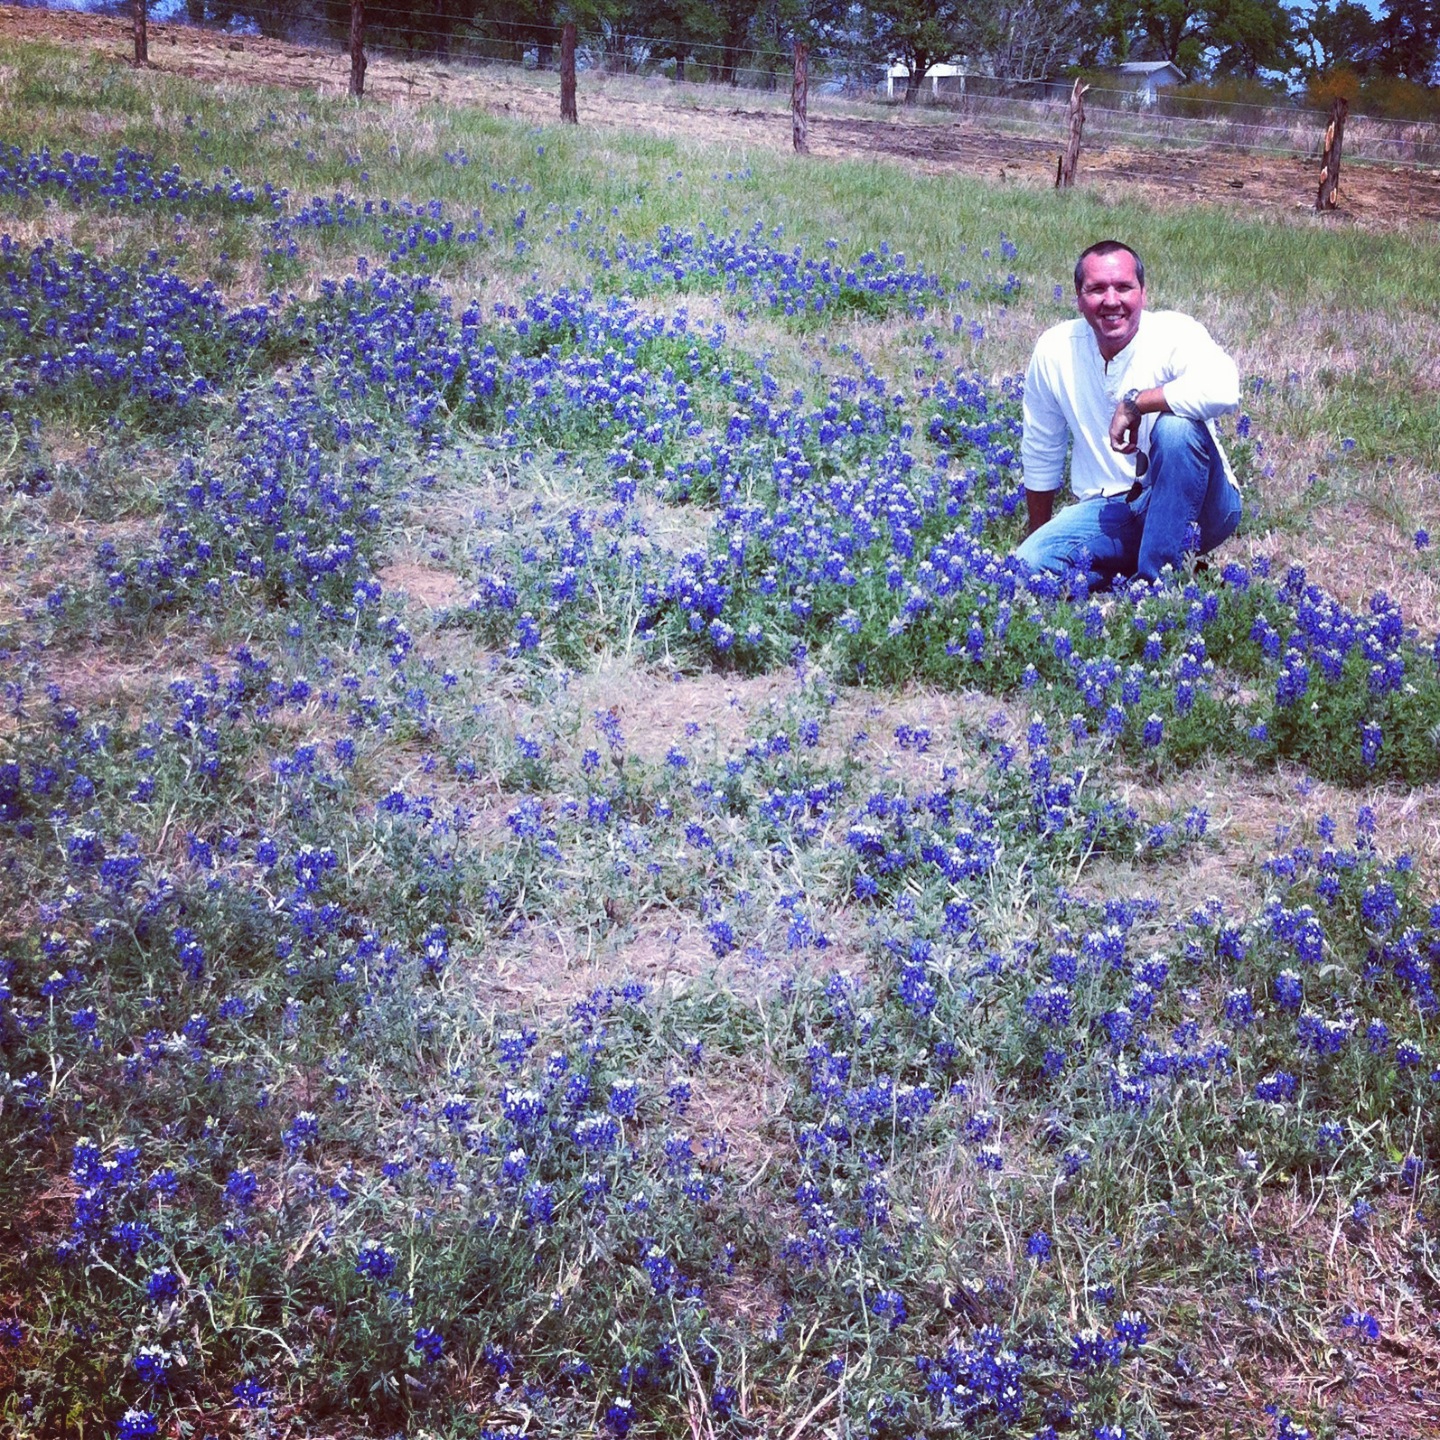 his first time seeing bluebonnets, my california guy